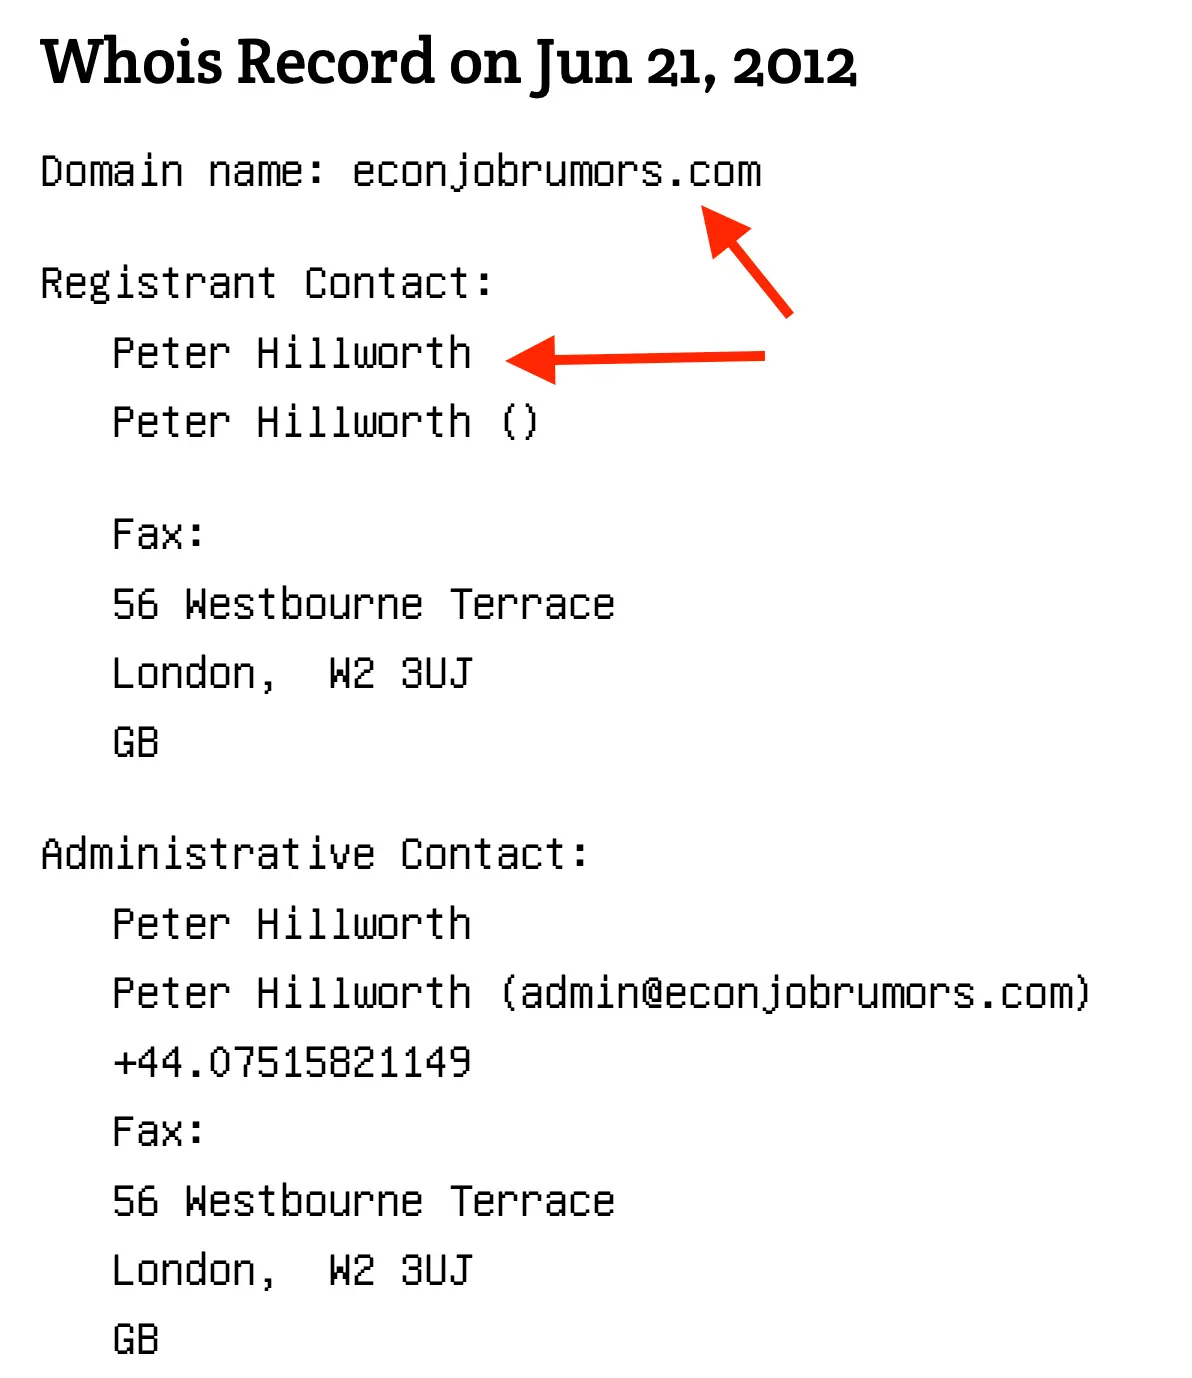 Domain records for Peter Hillworth